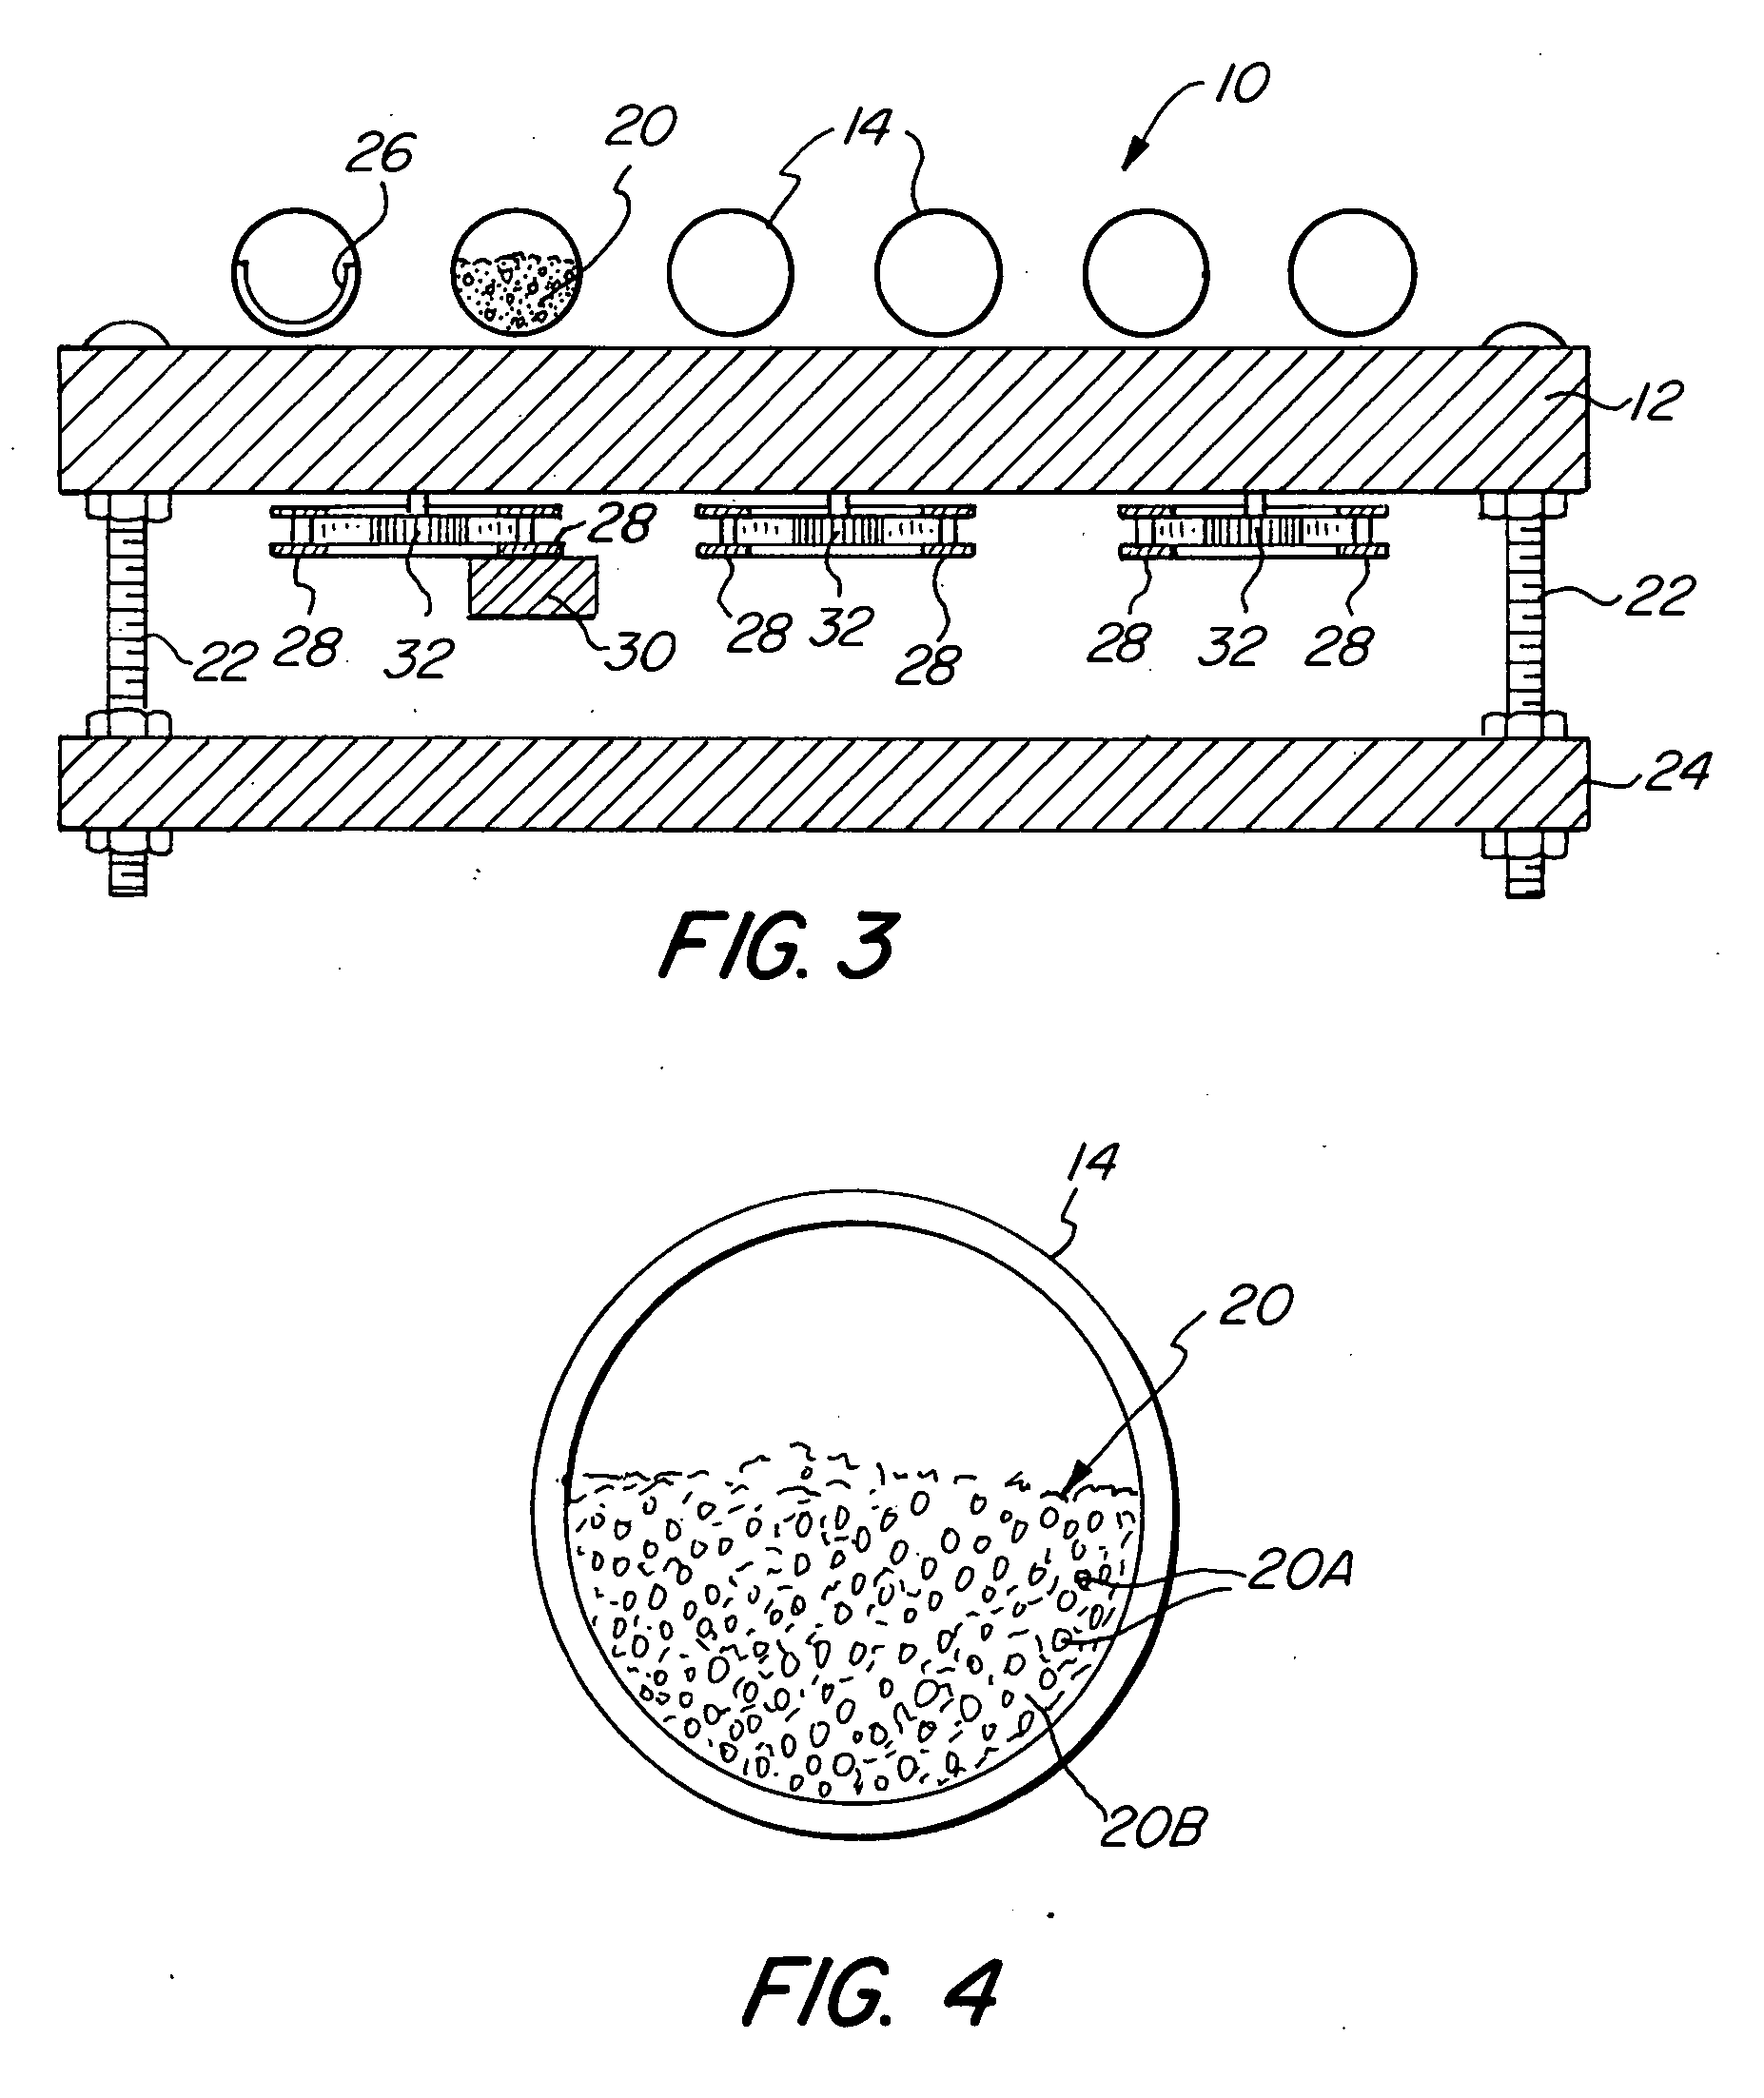 Device and method for coating serpentine fluorescent lamps